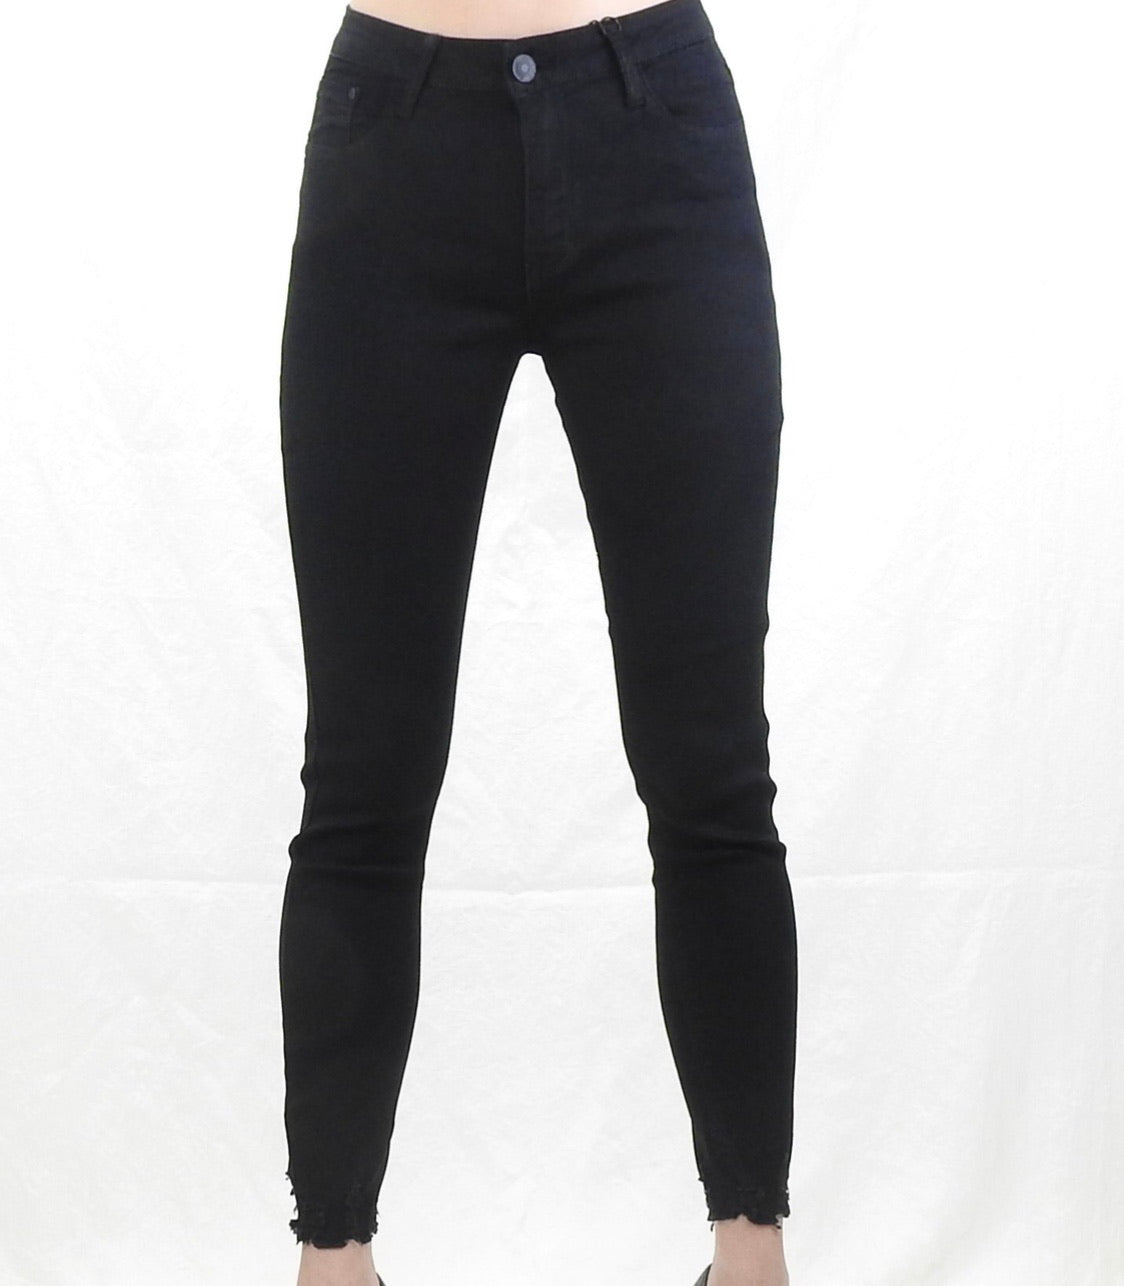 Best Jeans Ever No Rips - Black.